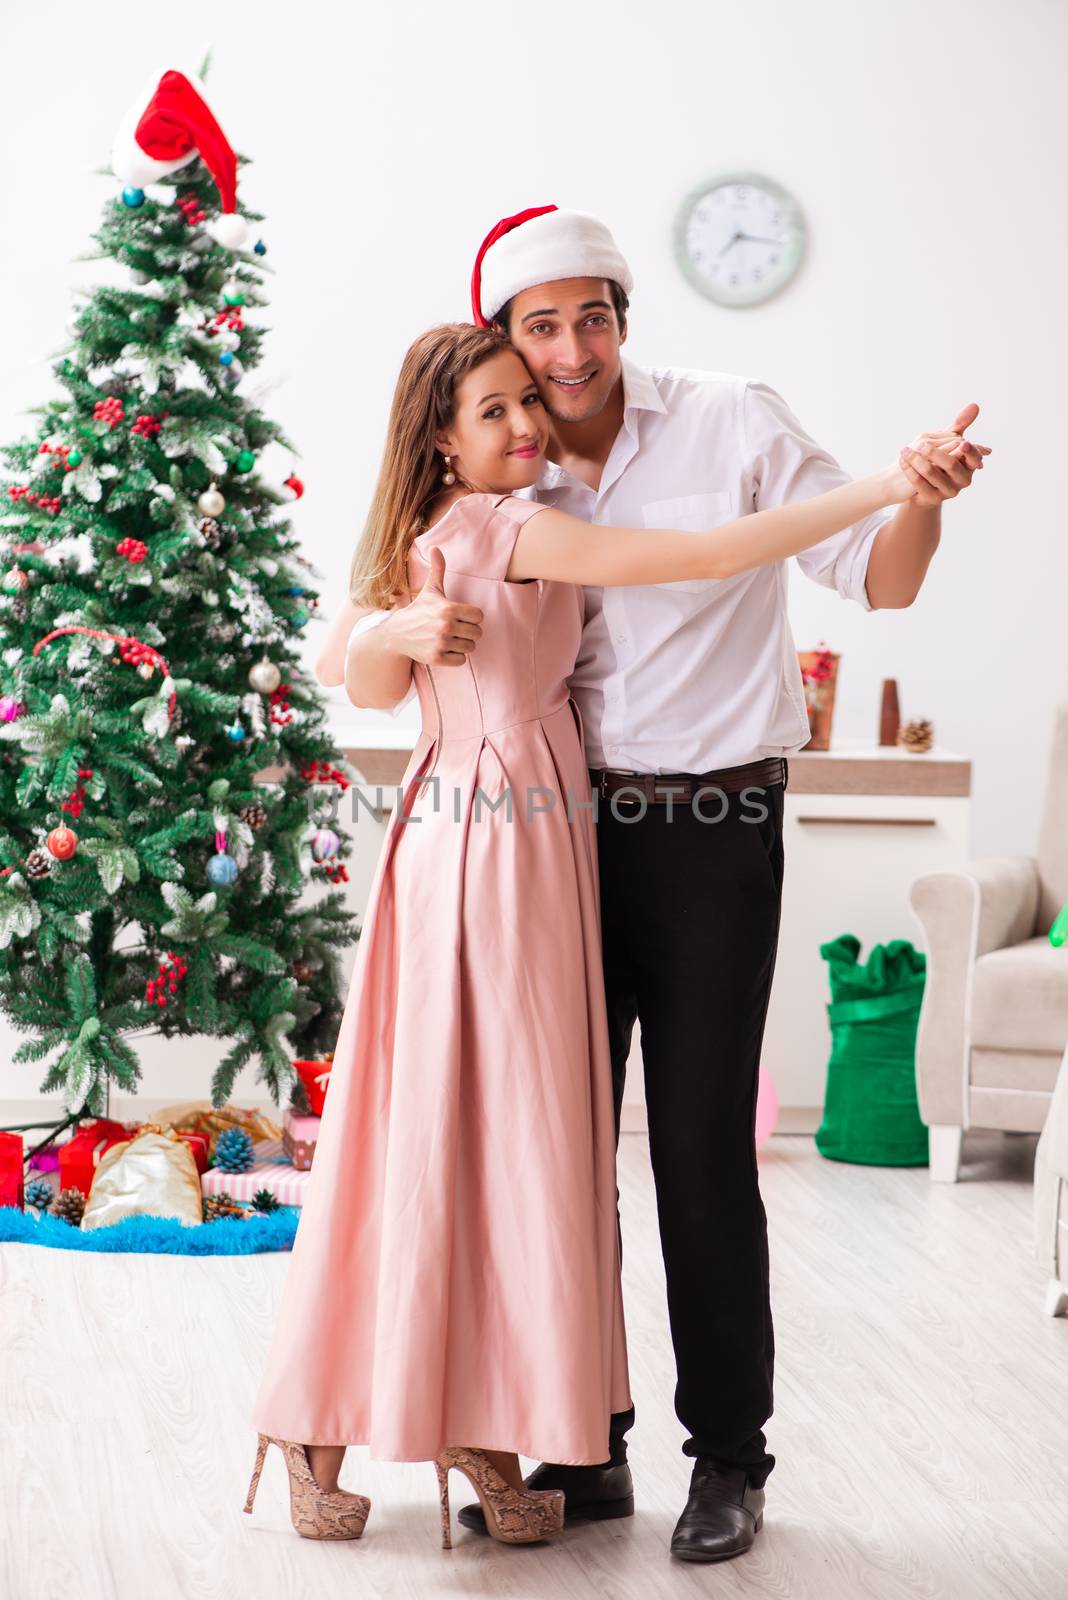 Young pair celebrating christmas at home